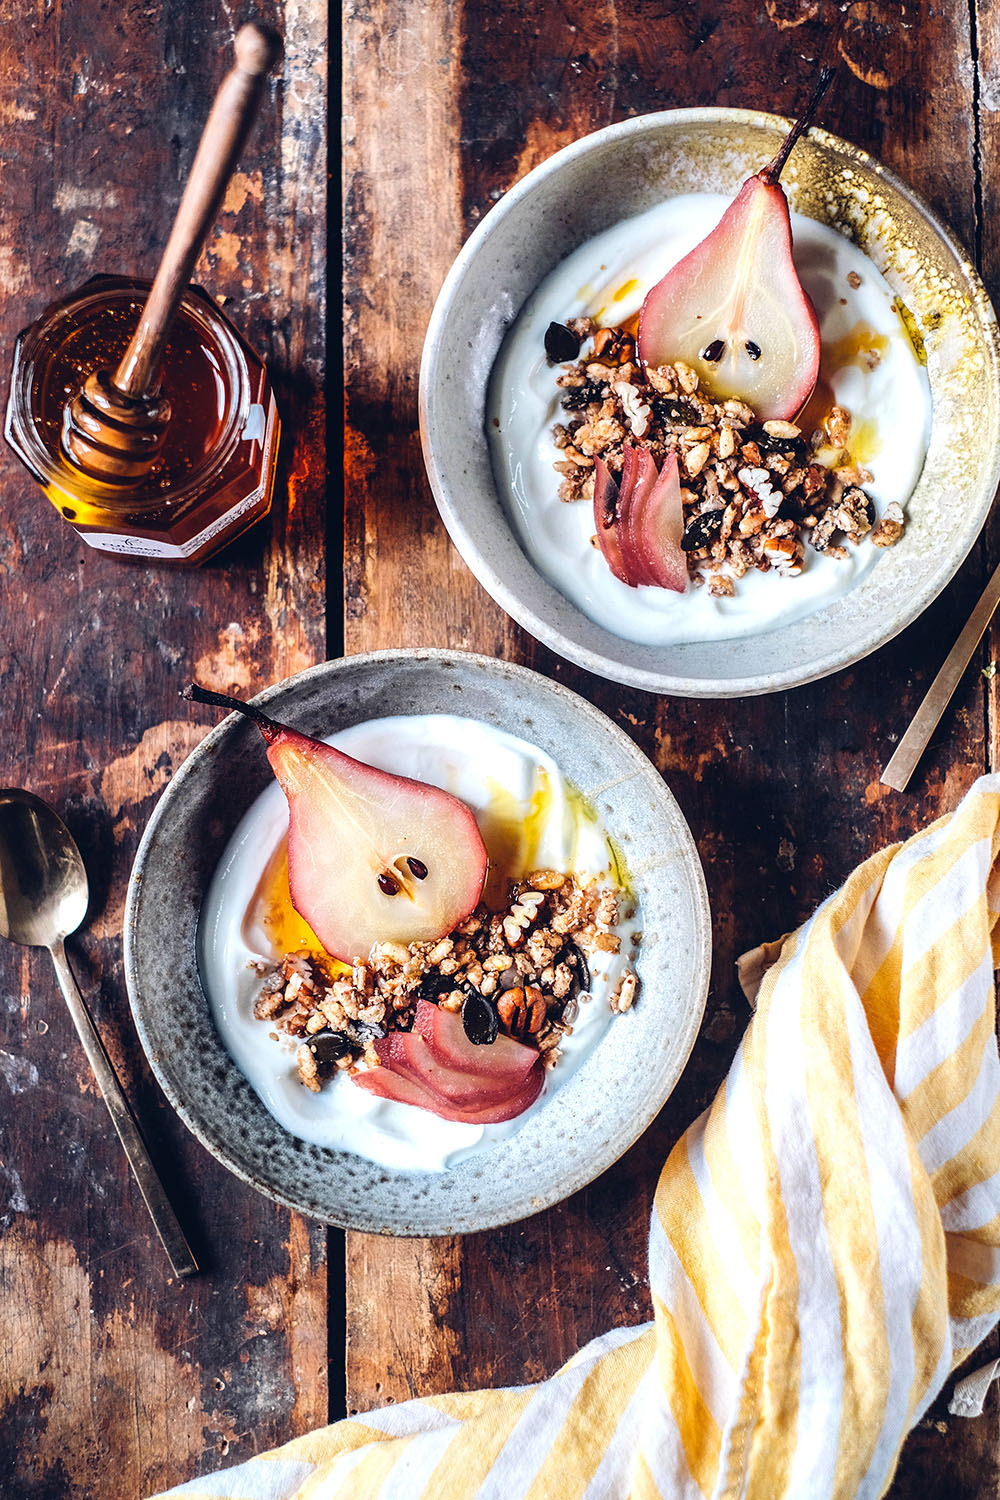 Gluten-free Honey Granola with Poached Pears – Our Favorite Autumn Breakfast